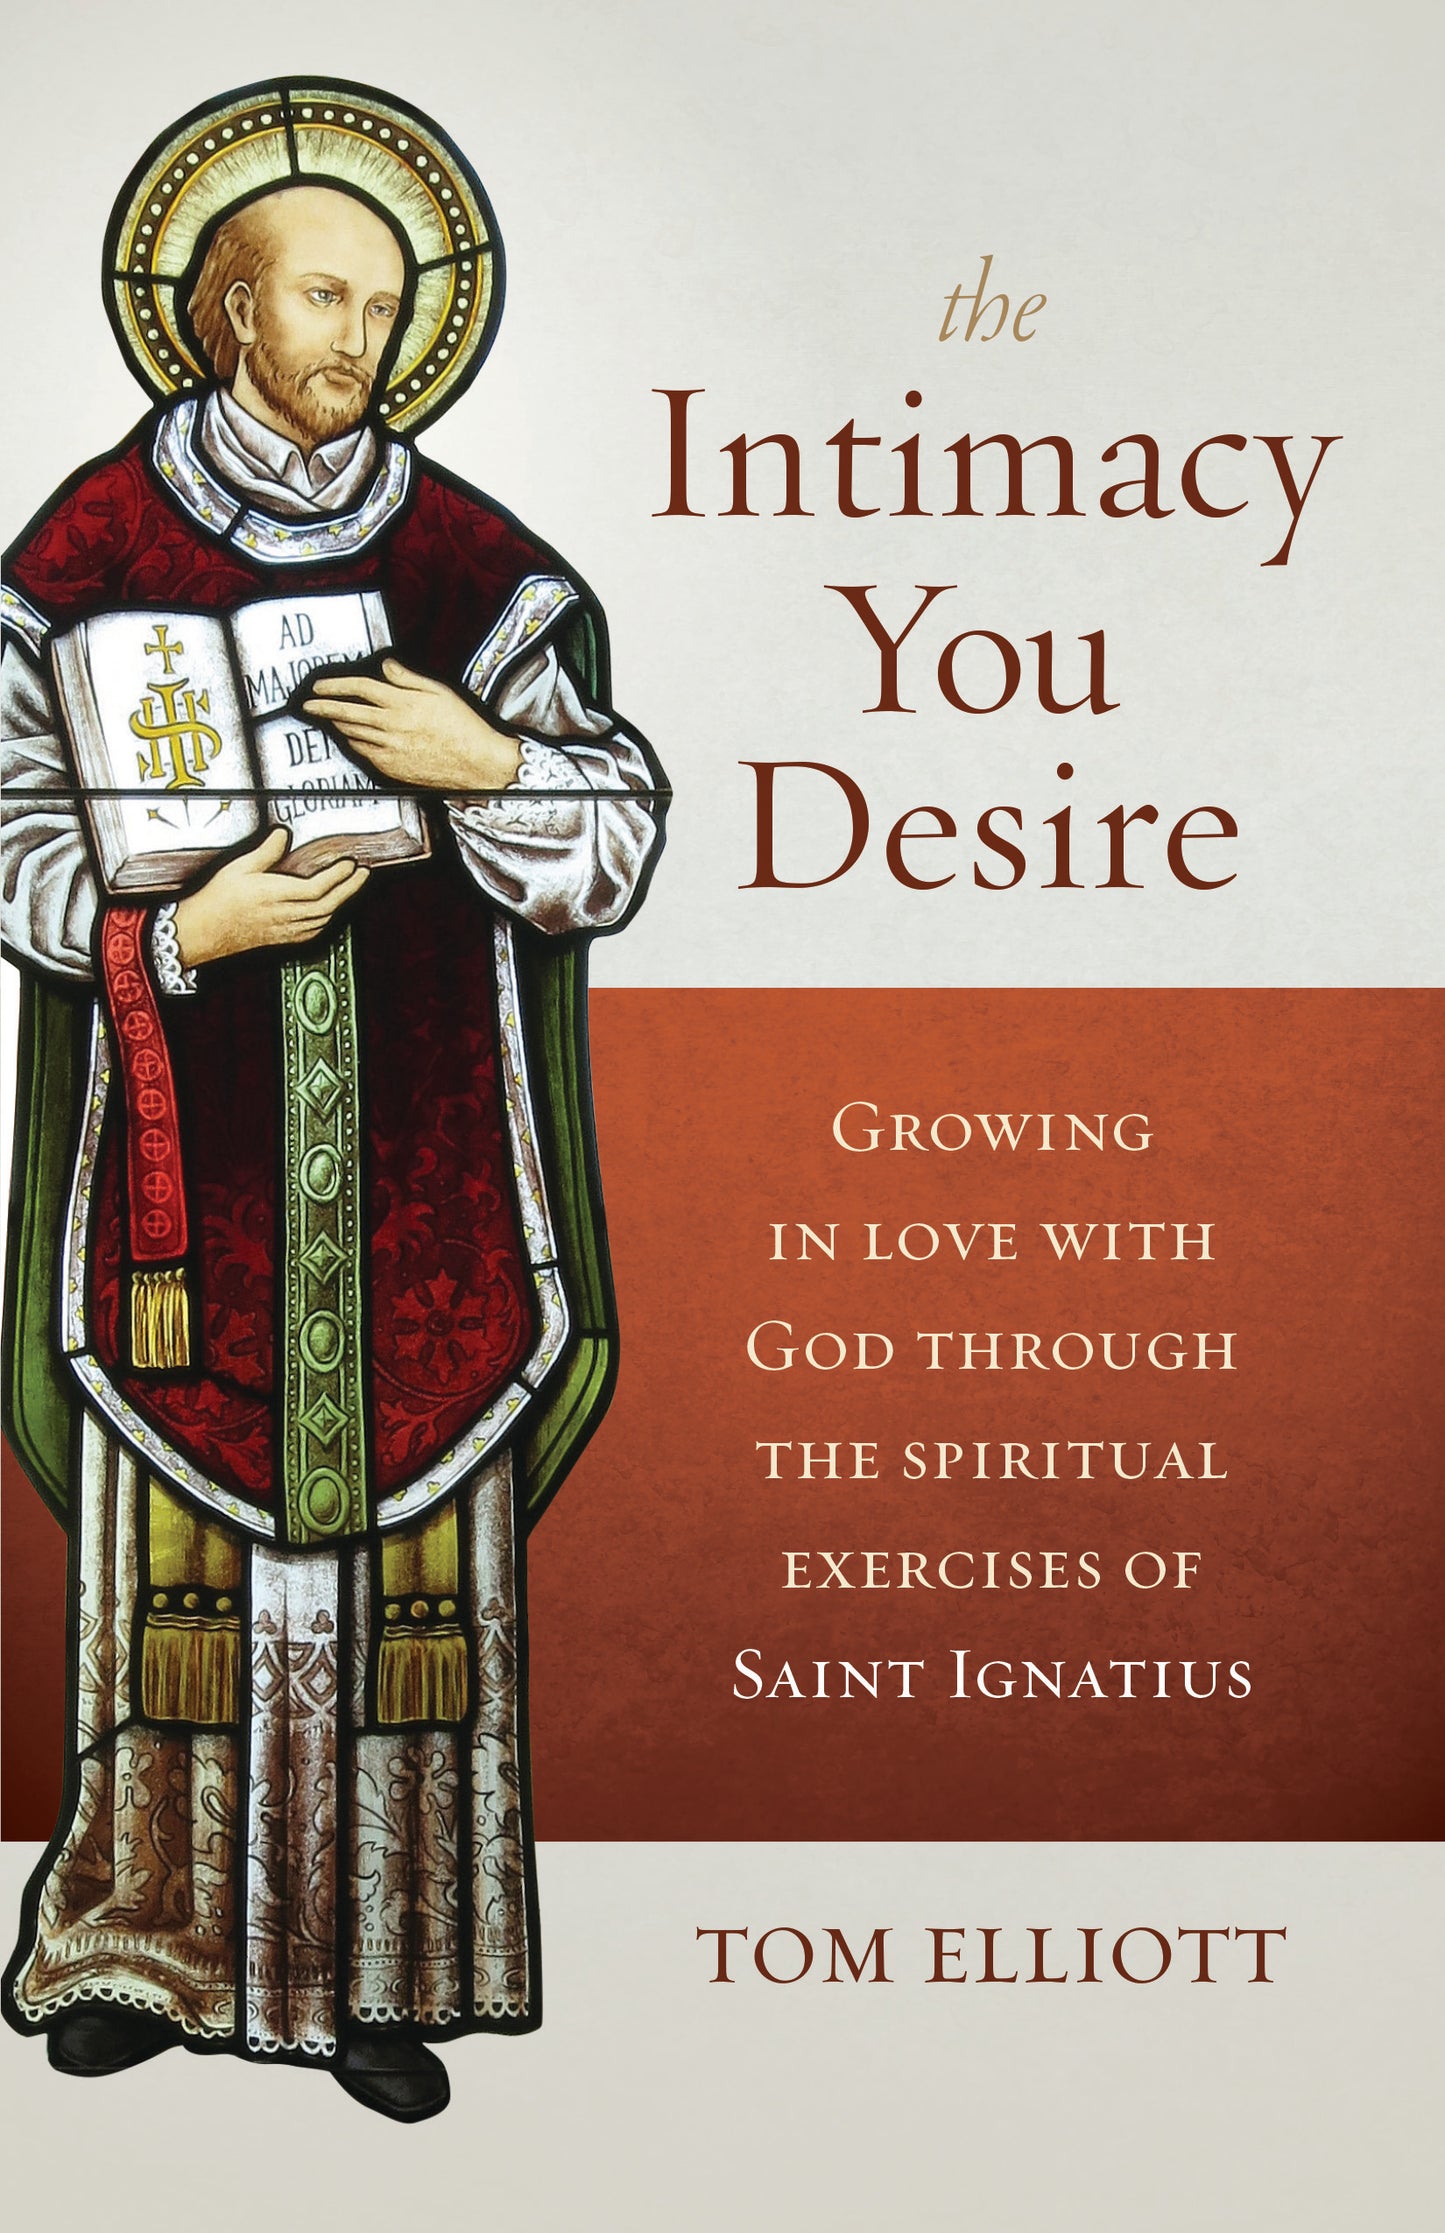 The Intimacy You Desire